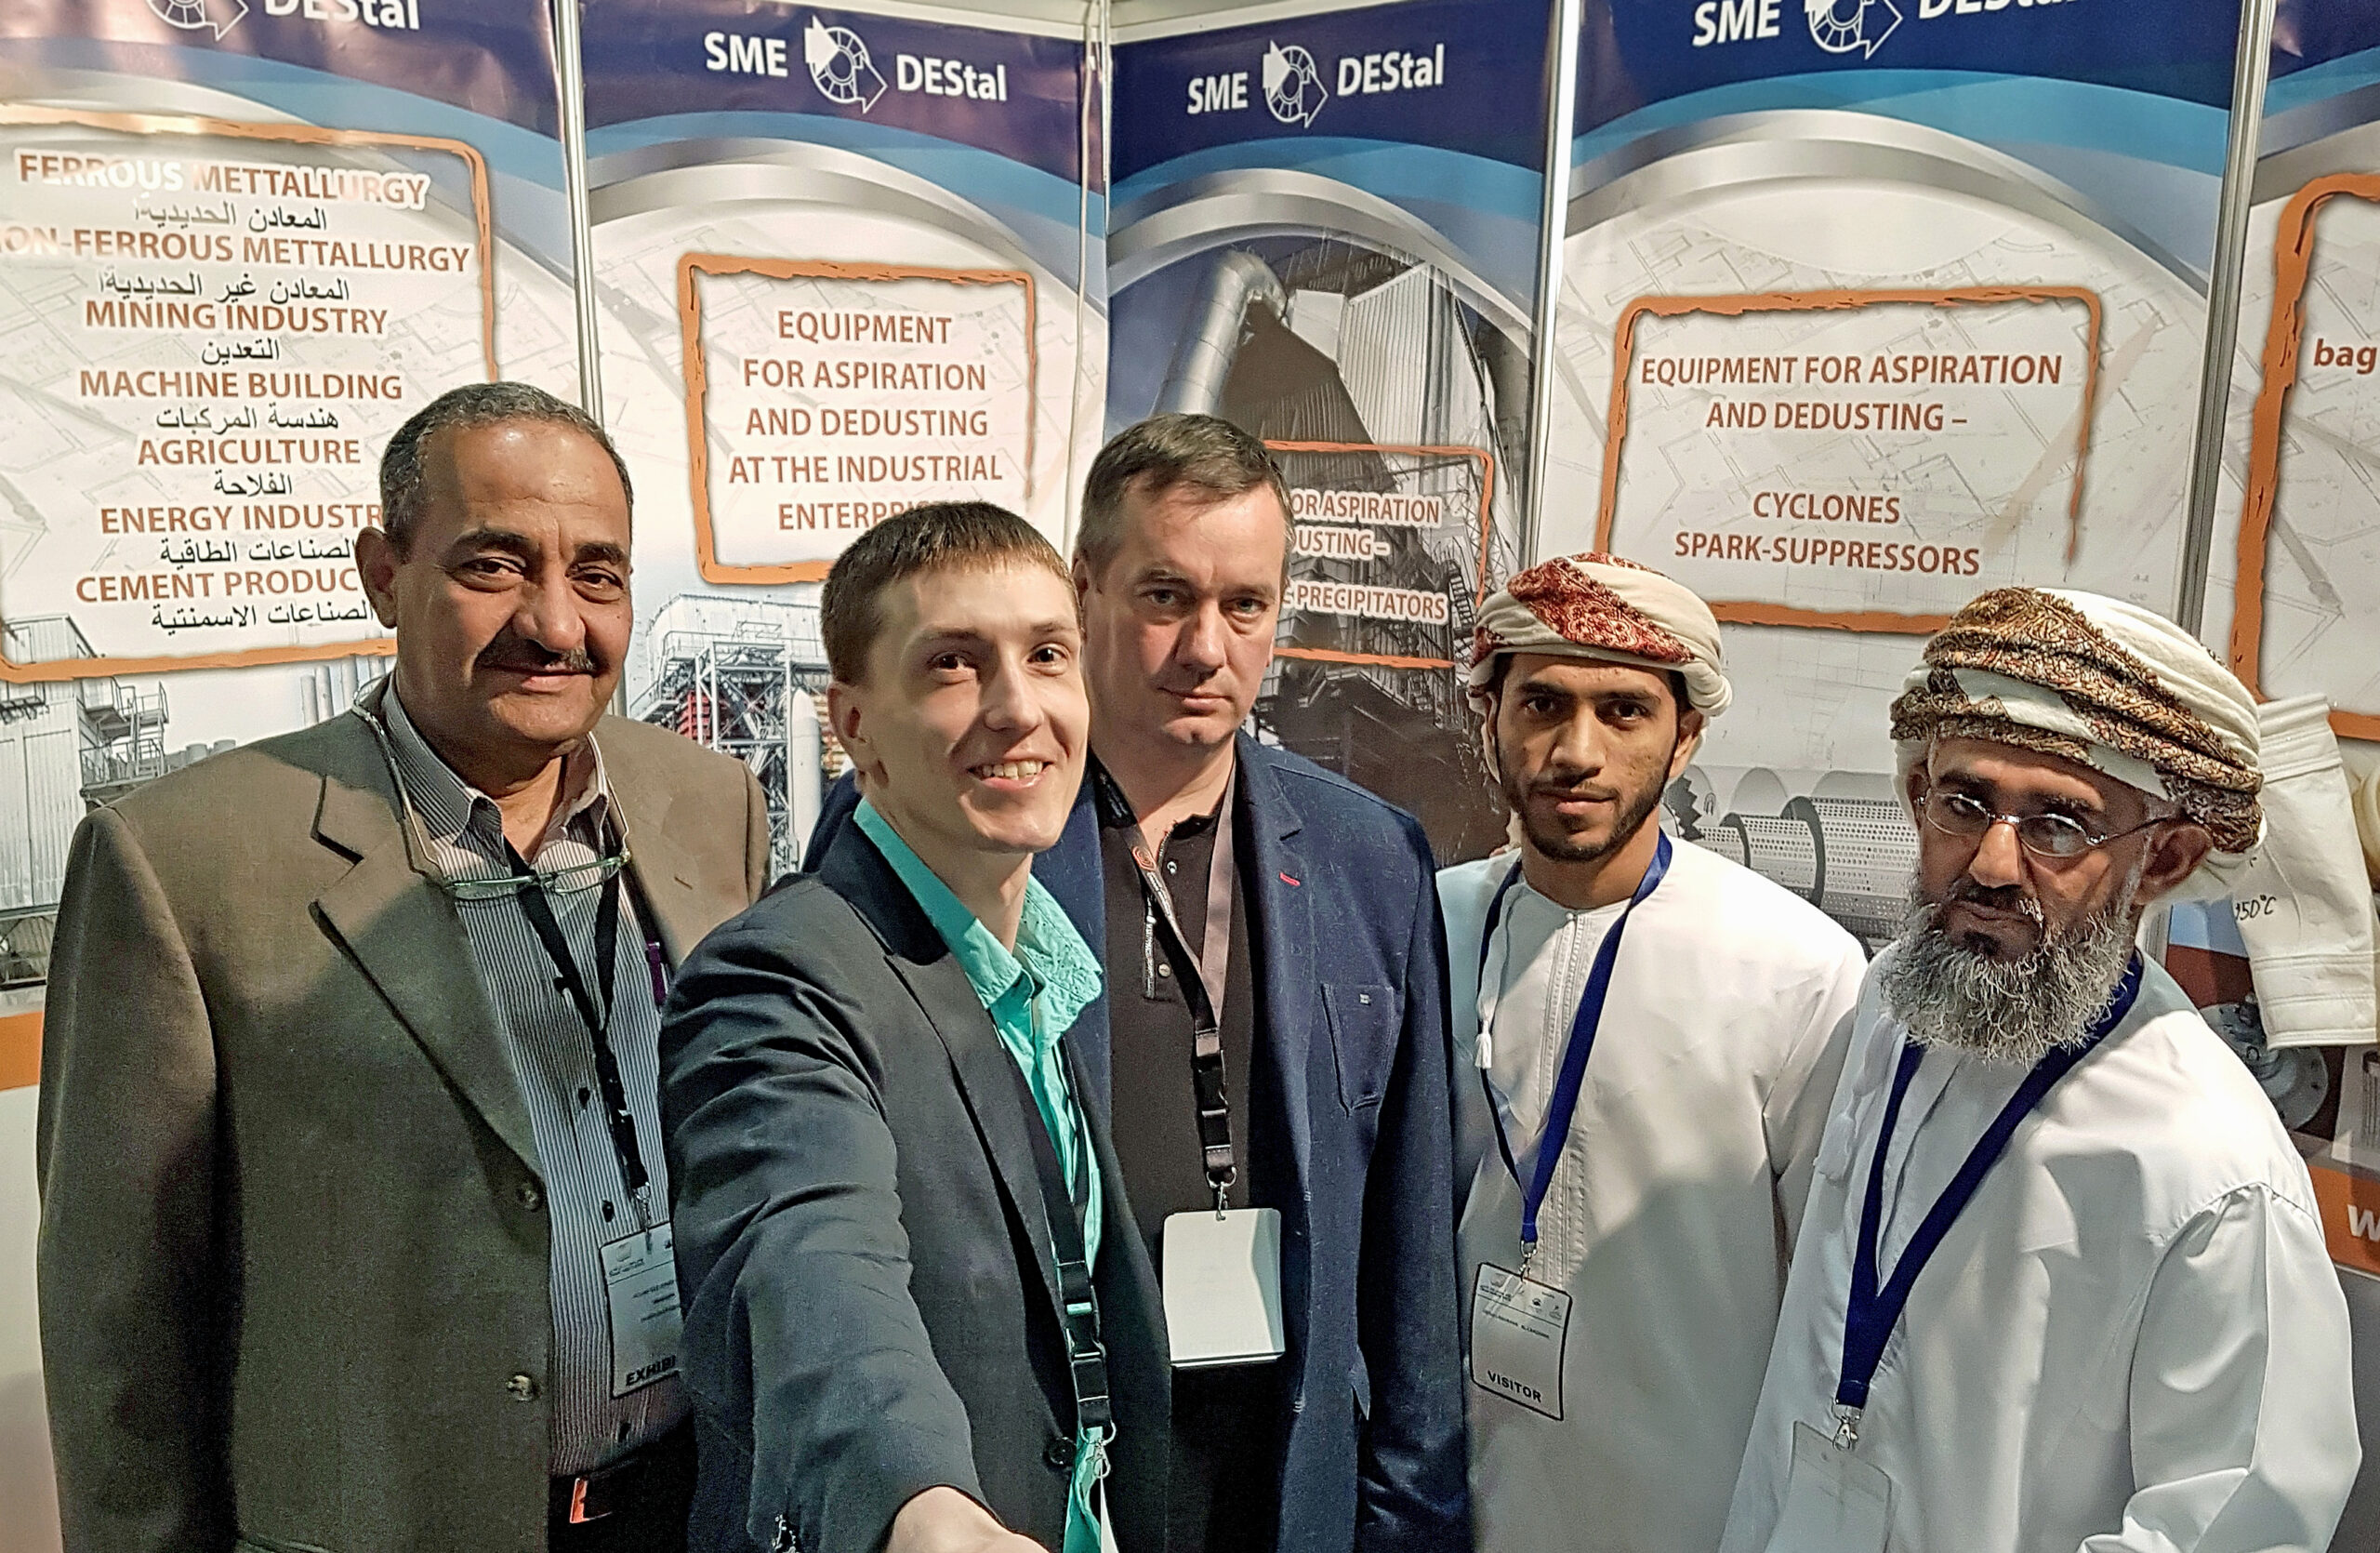 Specialized Mining Exhibition of the Middle East – “Oman Mining Expo”